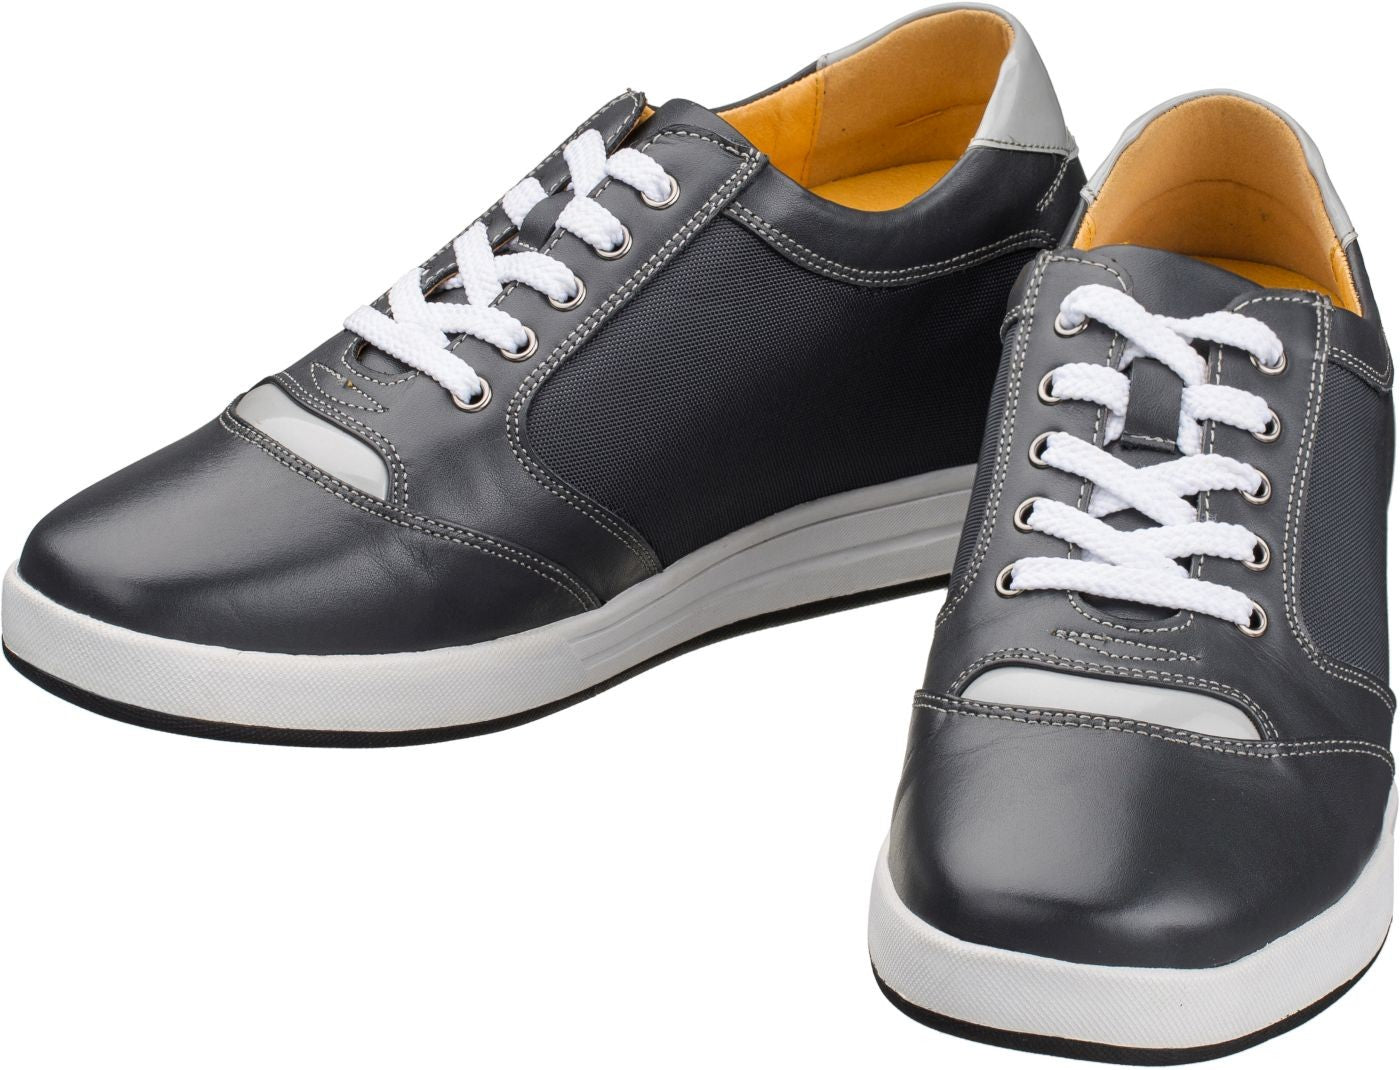 Elevator shoes height increase TOTO - A5327 - 3.2 Inches Taller (Grey)